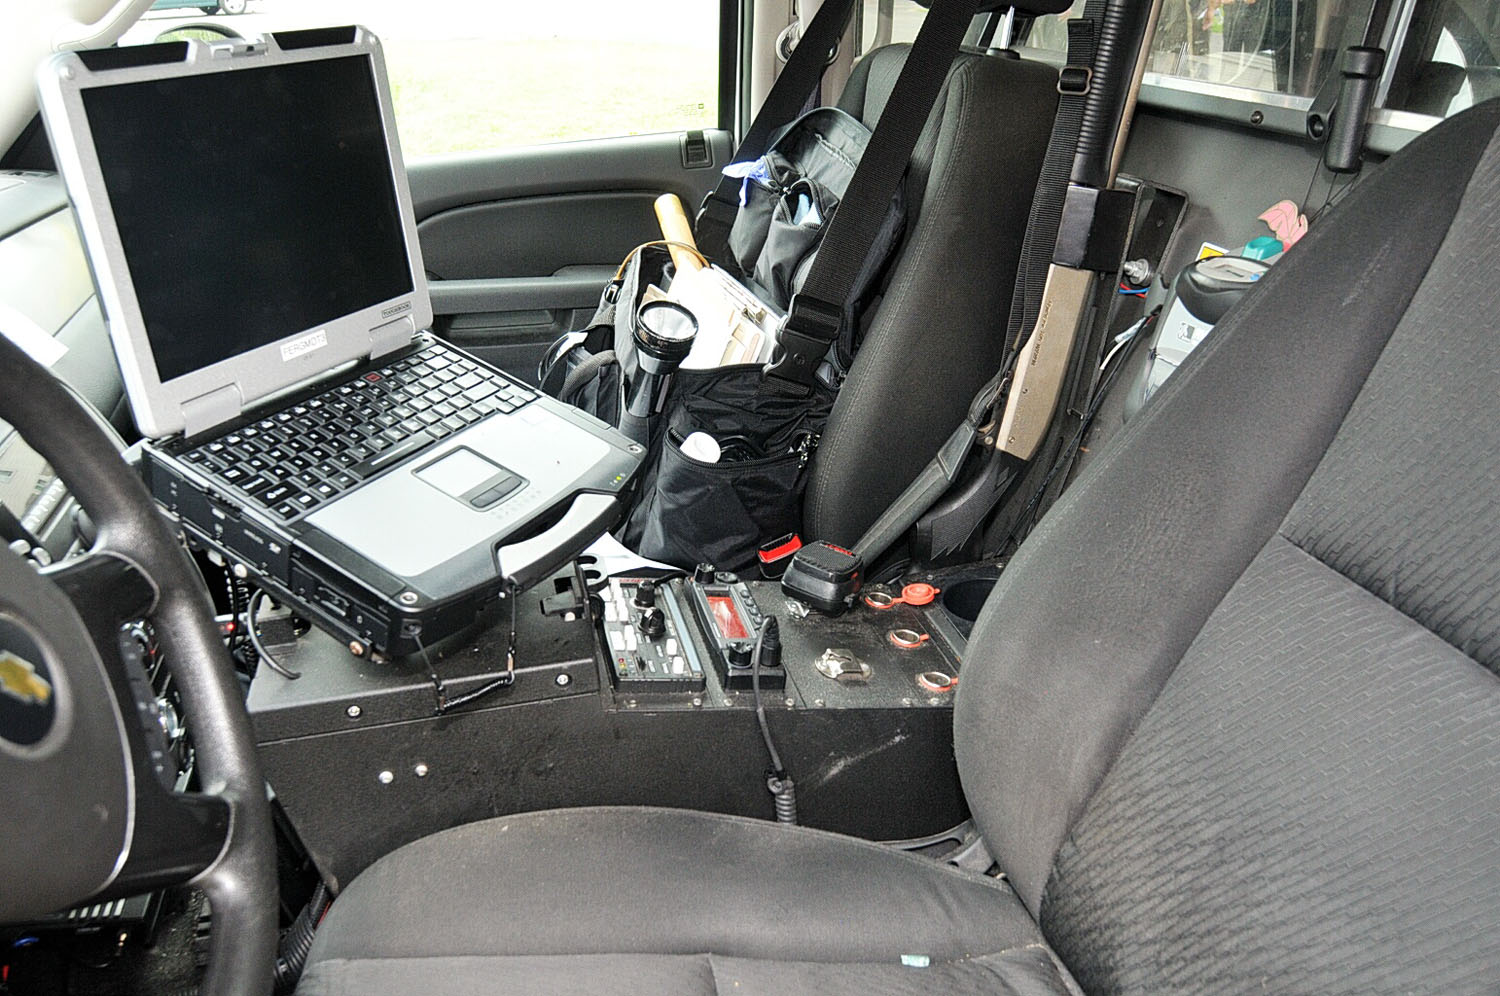 An undated evidence photograph made available by the St. Louis County prosecutors office on Nov. 25, 2014 shows the interior of Ferguson police officer Darren Wilson's vehicle taken after the shooting of Michael Brown.